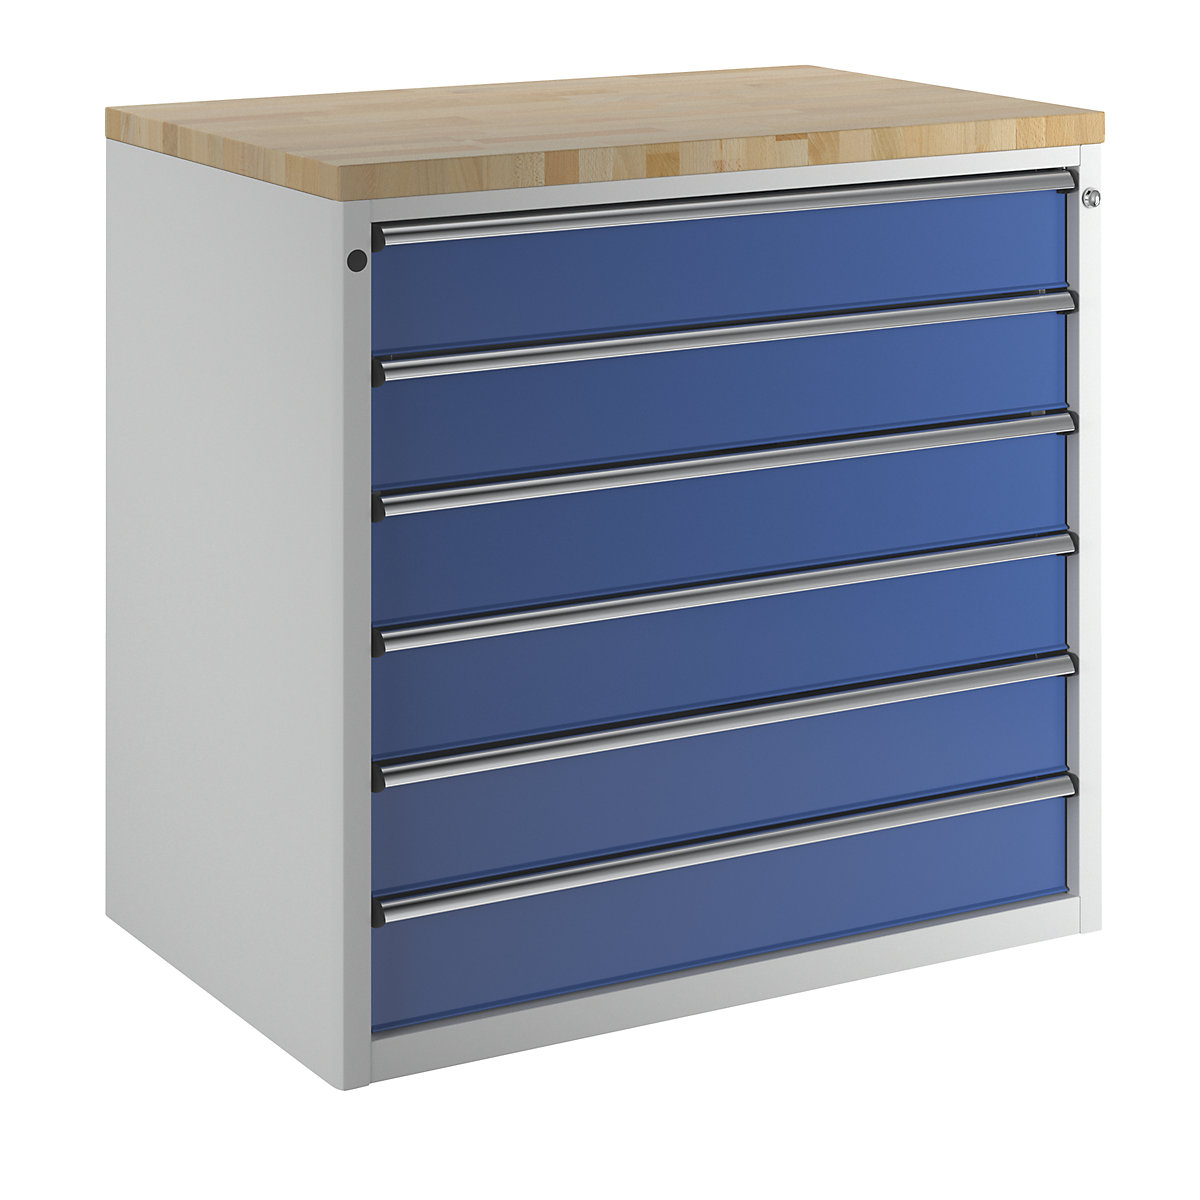 Cabinet for material and tool dispensing counter – ANKE, 6 x 150 mm drawers, grey / blue-5